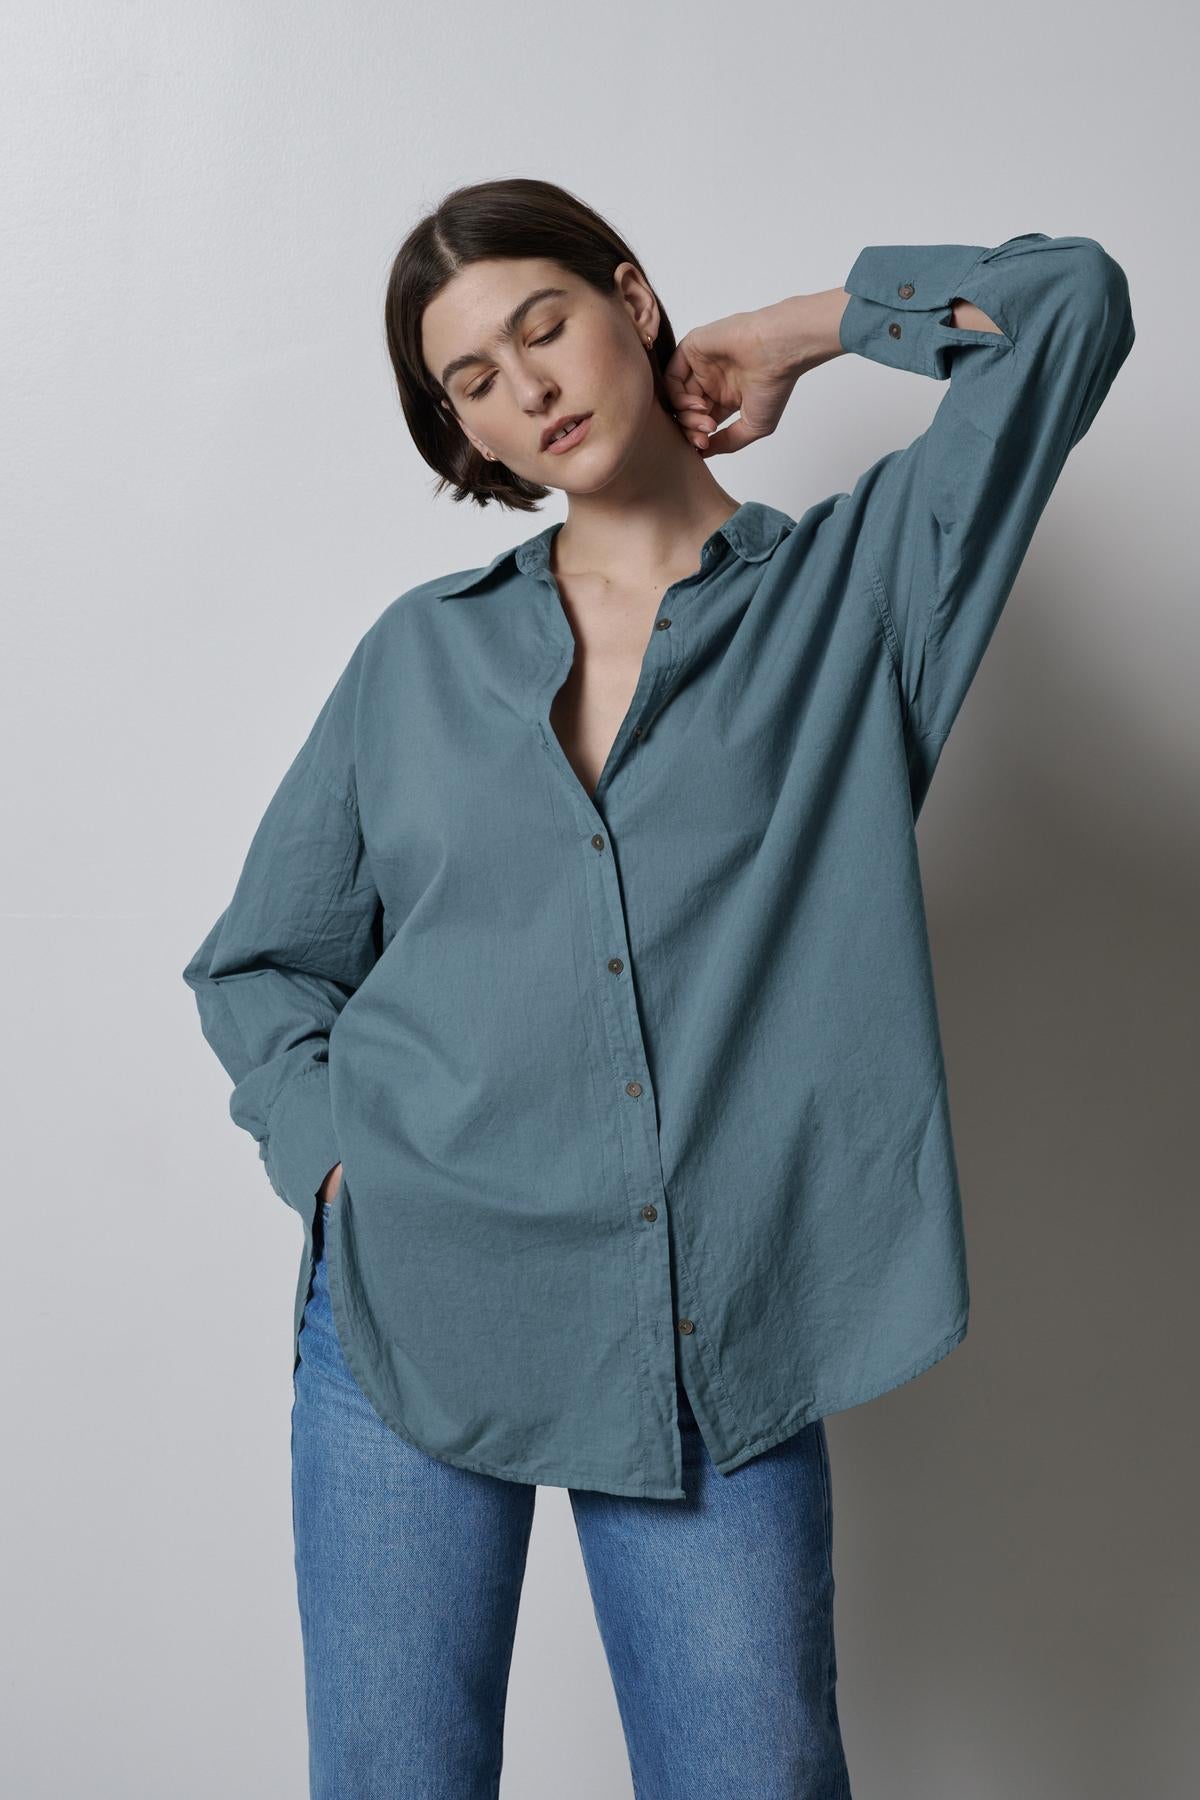 The model is wearing a Redondo button-up shirt by Velvet by Jenny Graham and jeans.-35783065927873